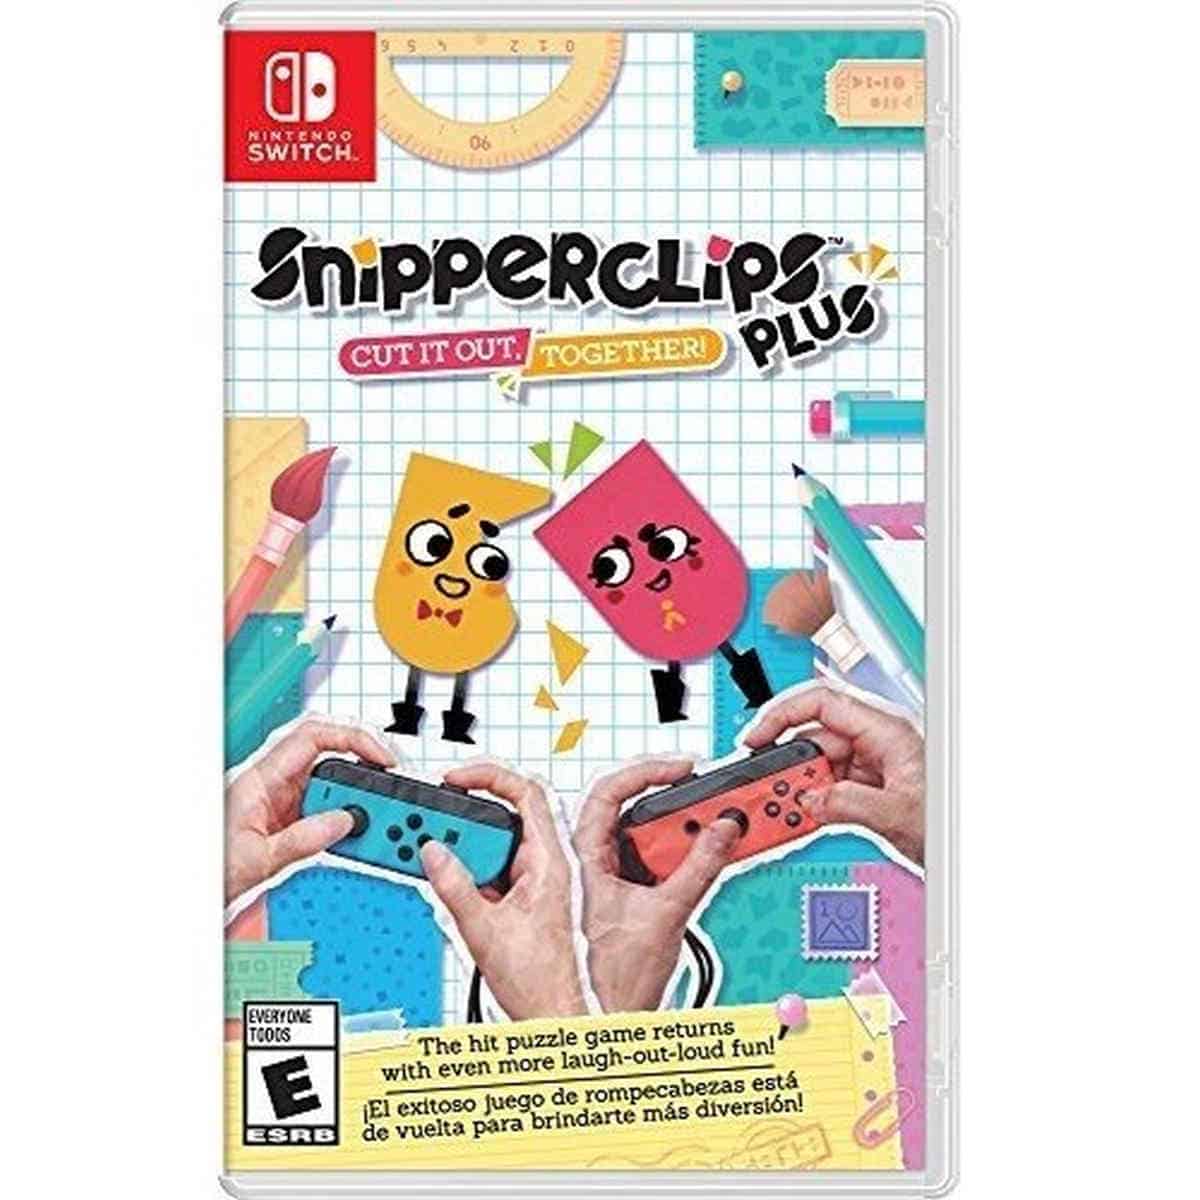 Snipperclips | Best Nintendo Switch Multiplayer Games